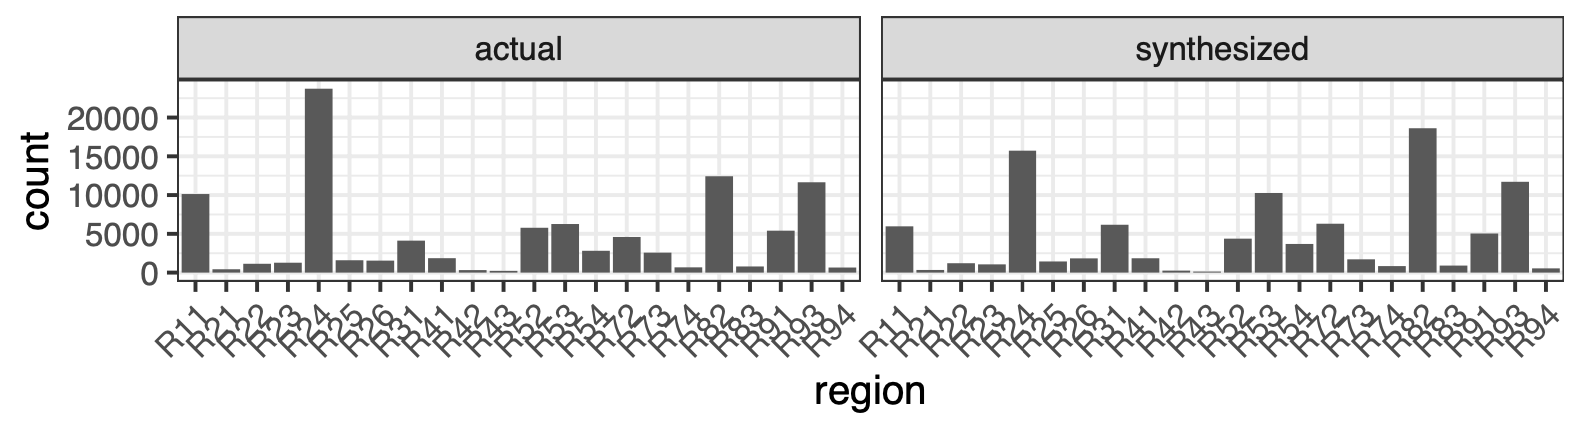 Distributions of the Region variable.